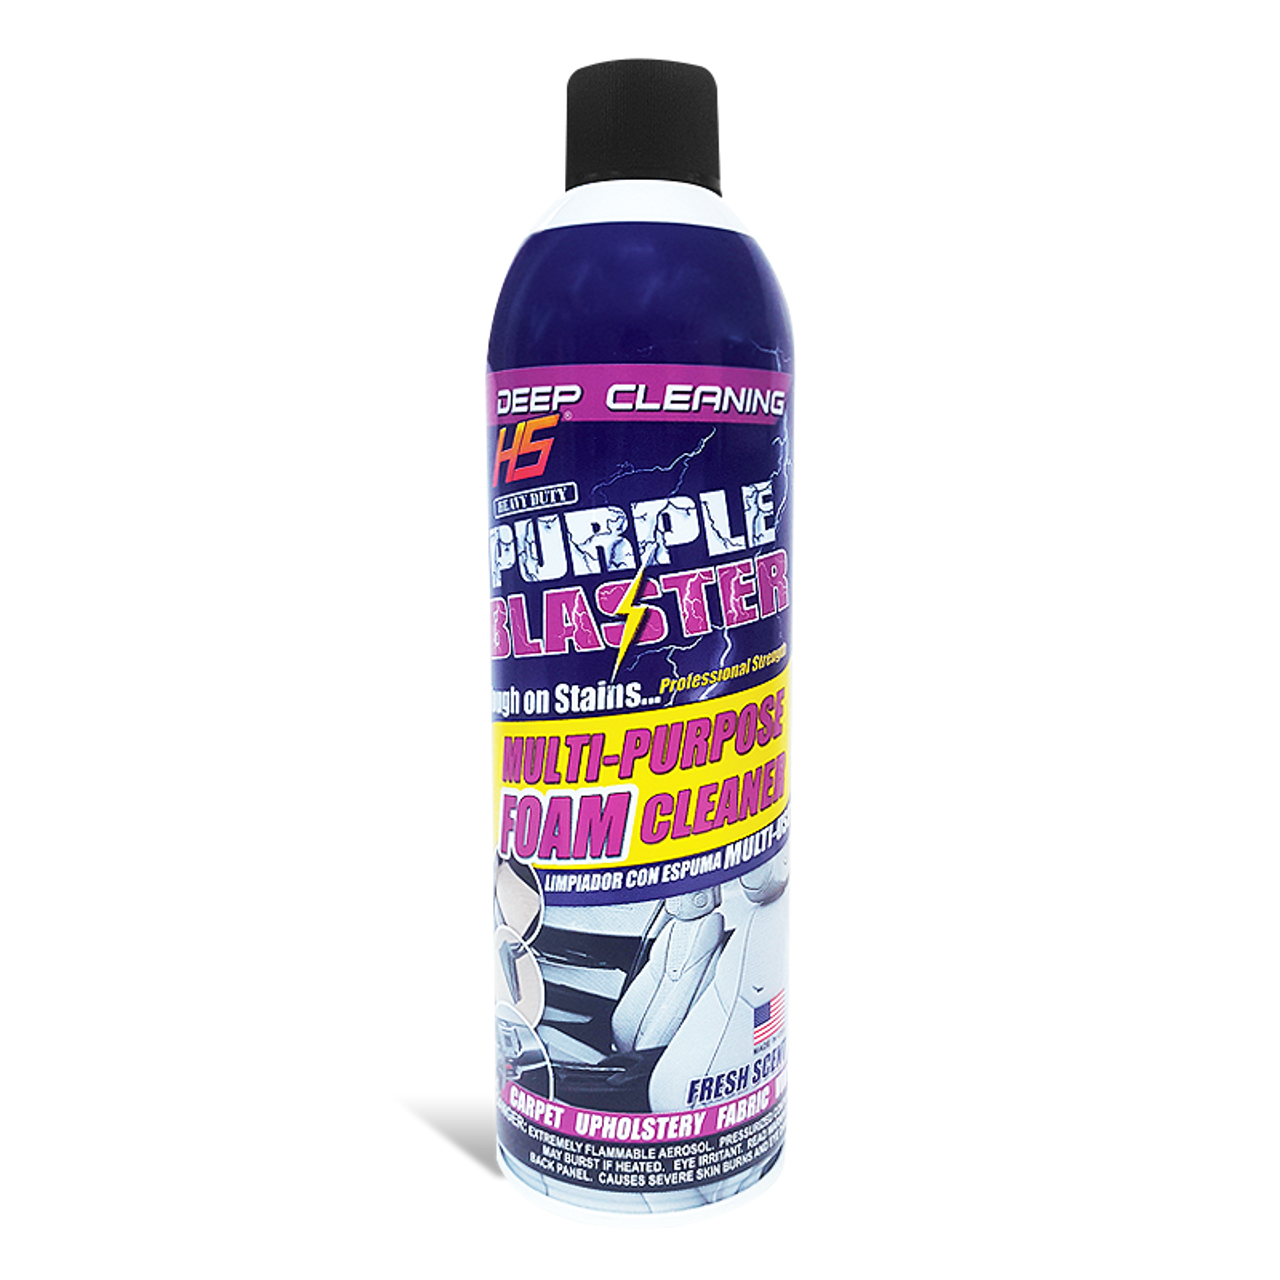 MWC Mr Purple Multi-Surface All Purpose Cleaner Degreaser Industrial, Biodegradable, Full Concentrate, 1 Gallon